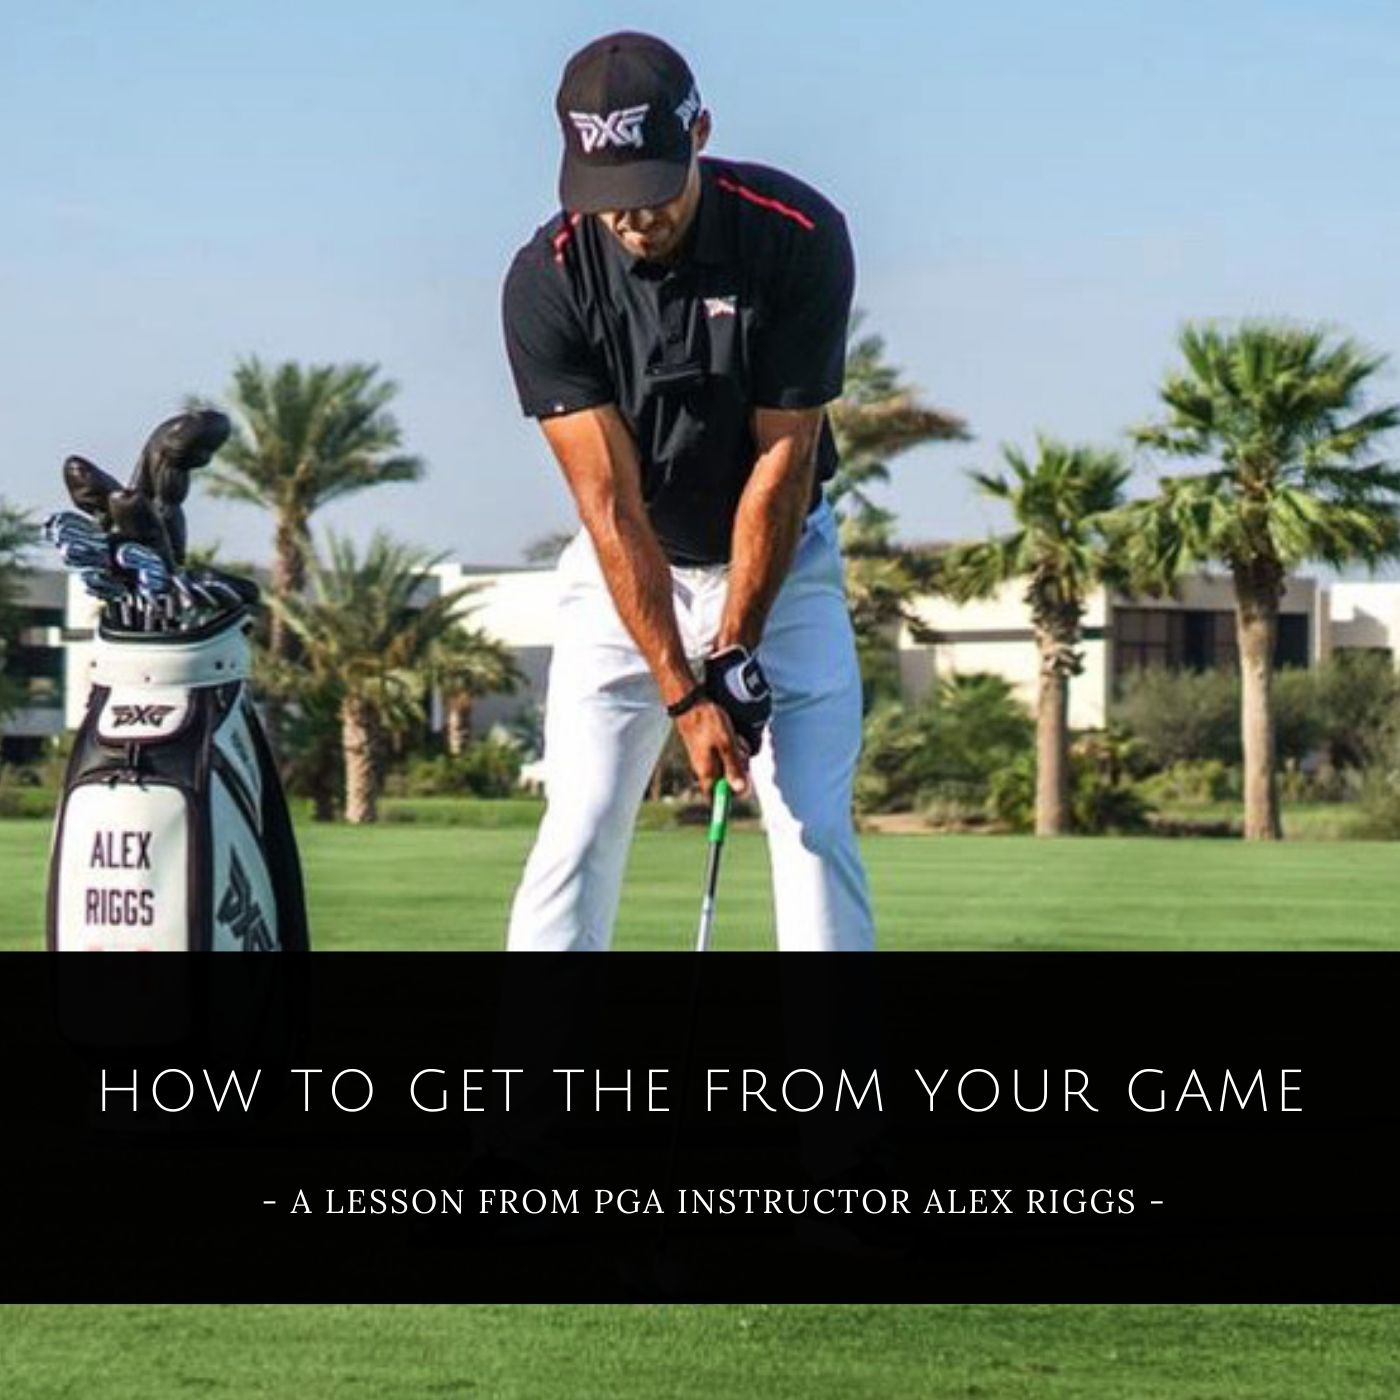 How to Get the Most Out of Your Golf Game: A Lesson From PGA Instructor Alex Riggs